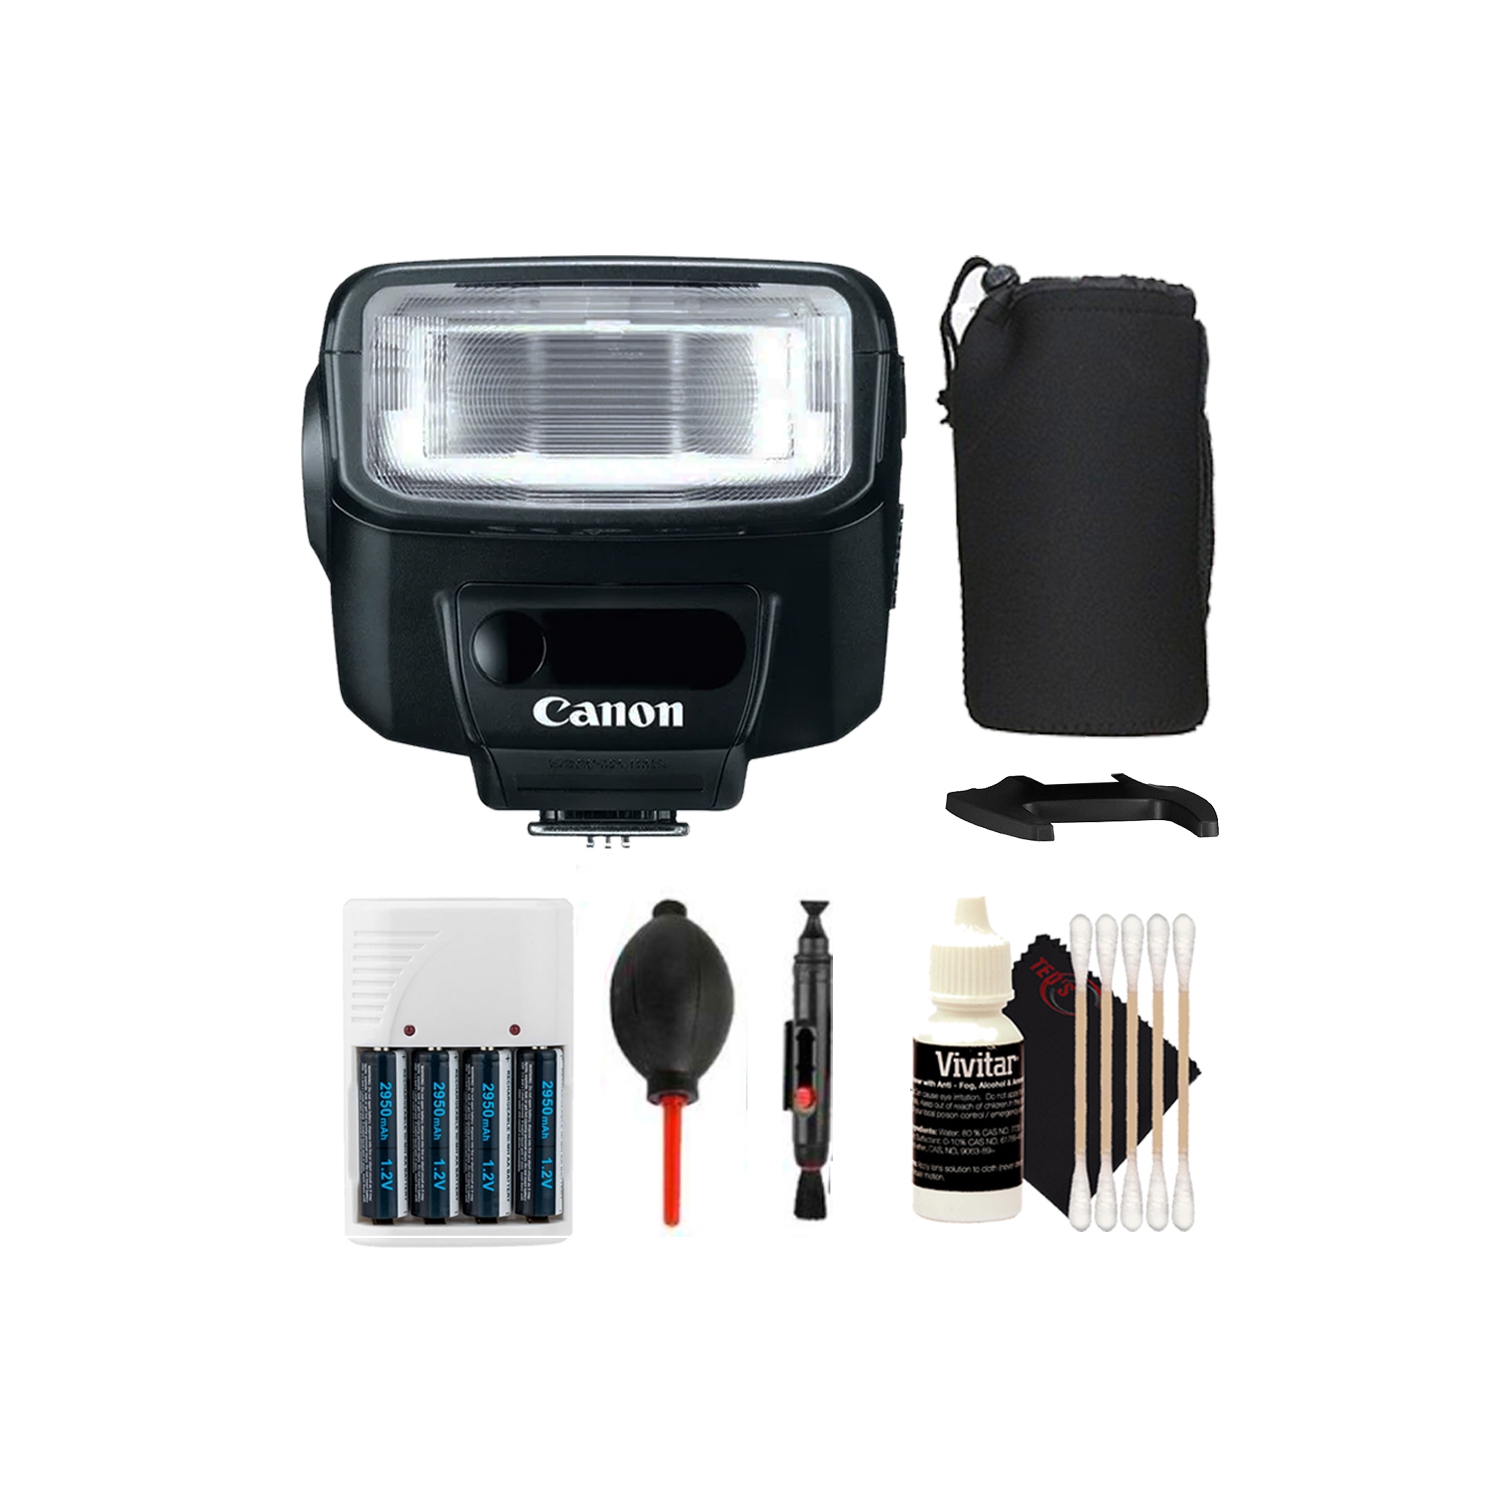 Canon 270EX II Speedlite Flash for Canon SLR Cameras (Black)+ 4AA Battery Charger + Dust Blower + Lens Pen + 3pc Cleaning Kit